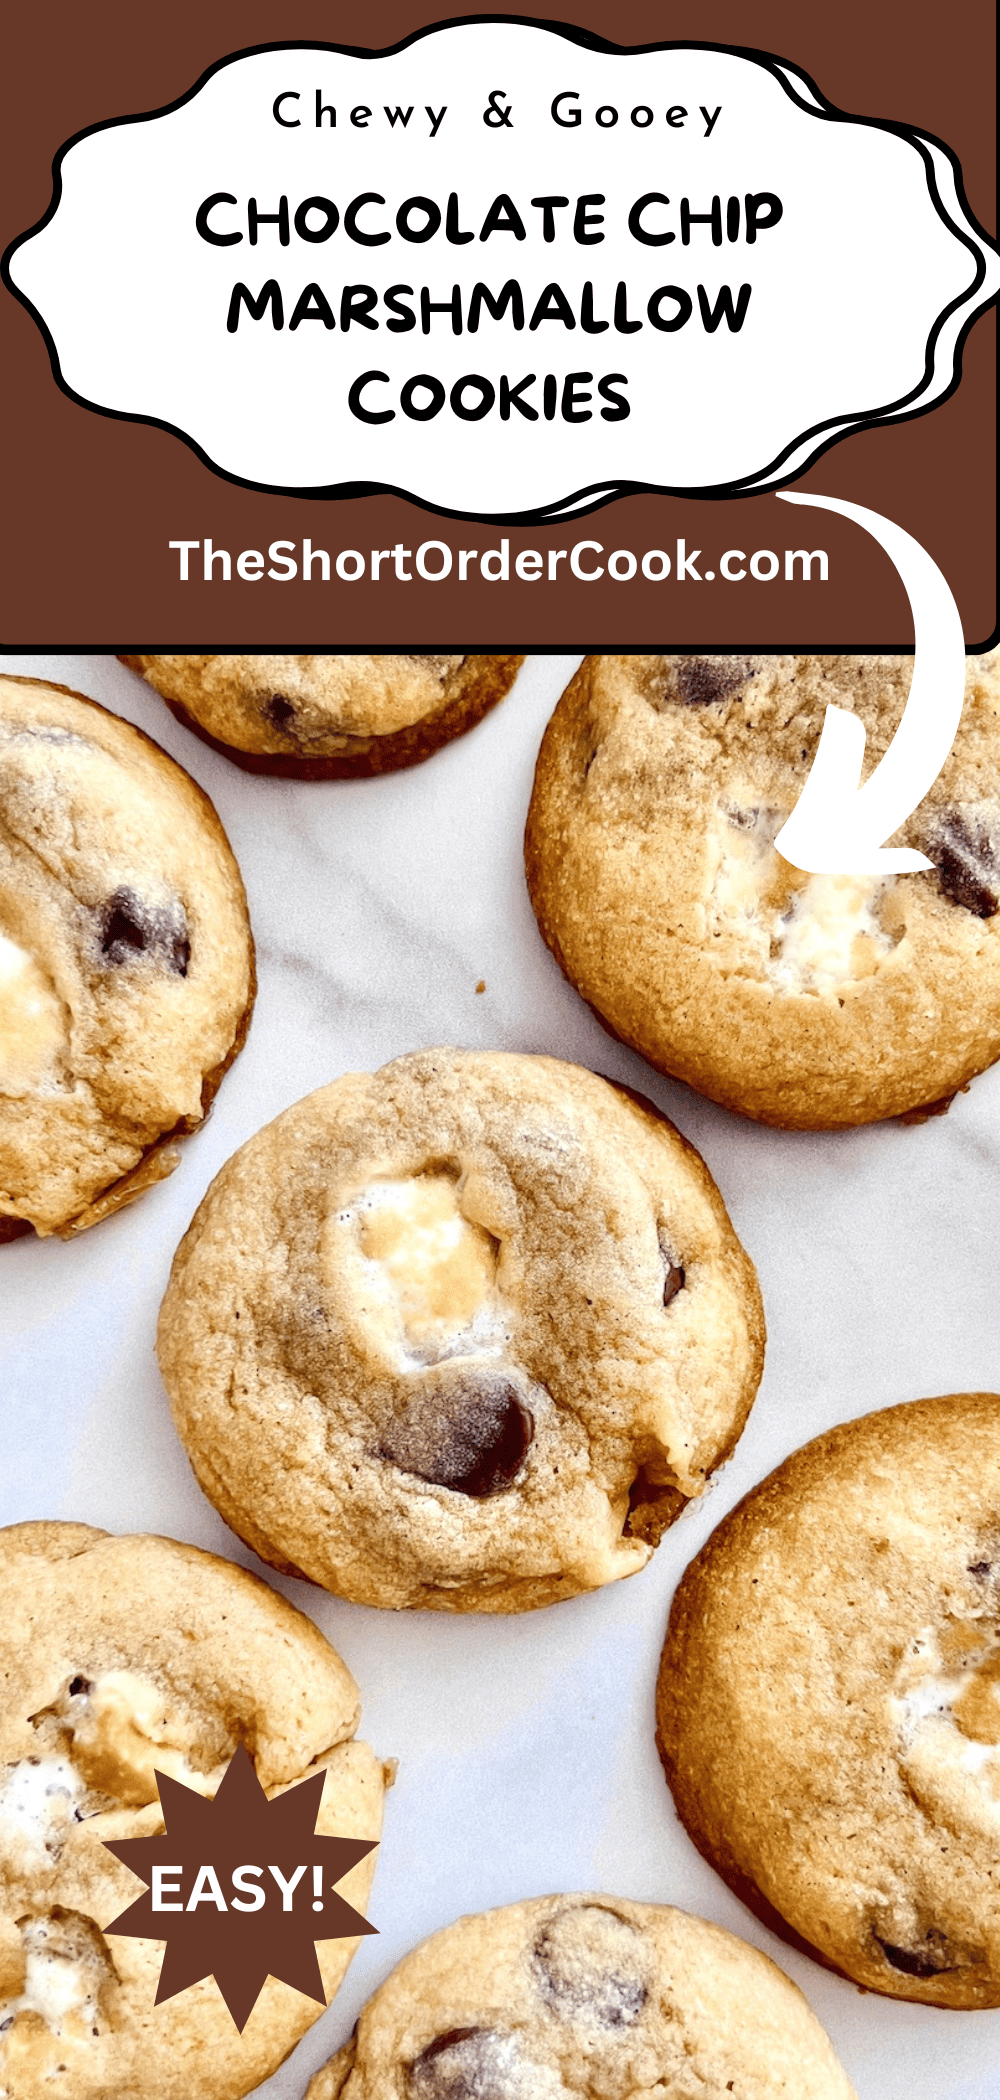 Cookies loaded with milk chocolate chips and chunks & mini marshmallows.